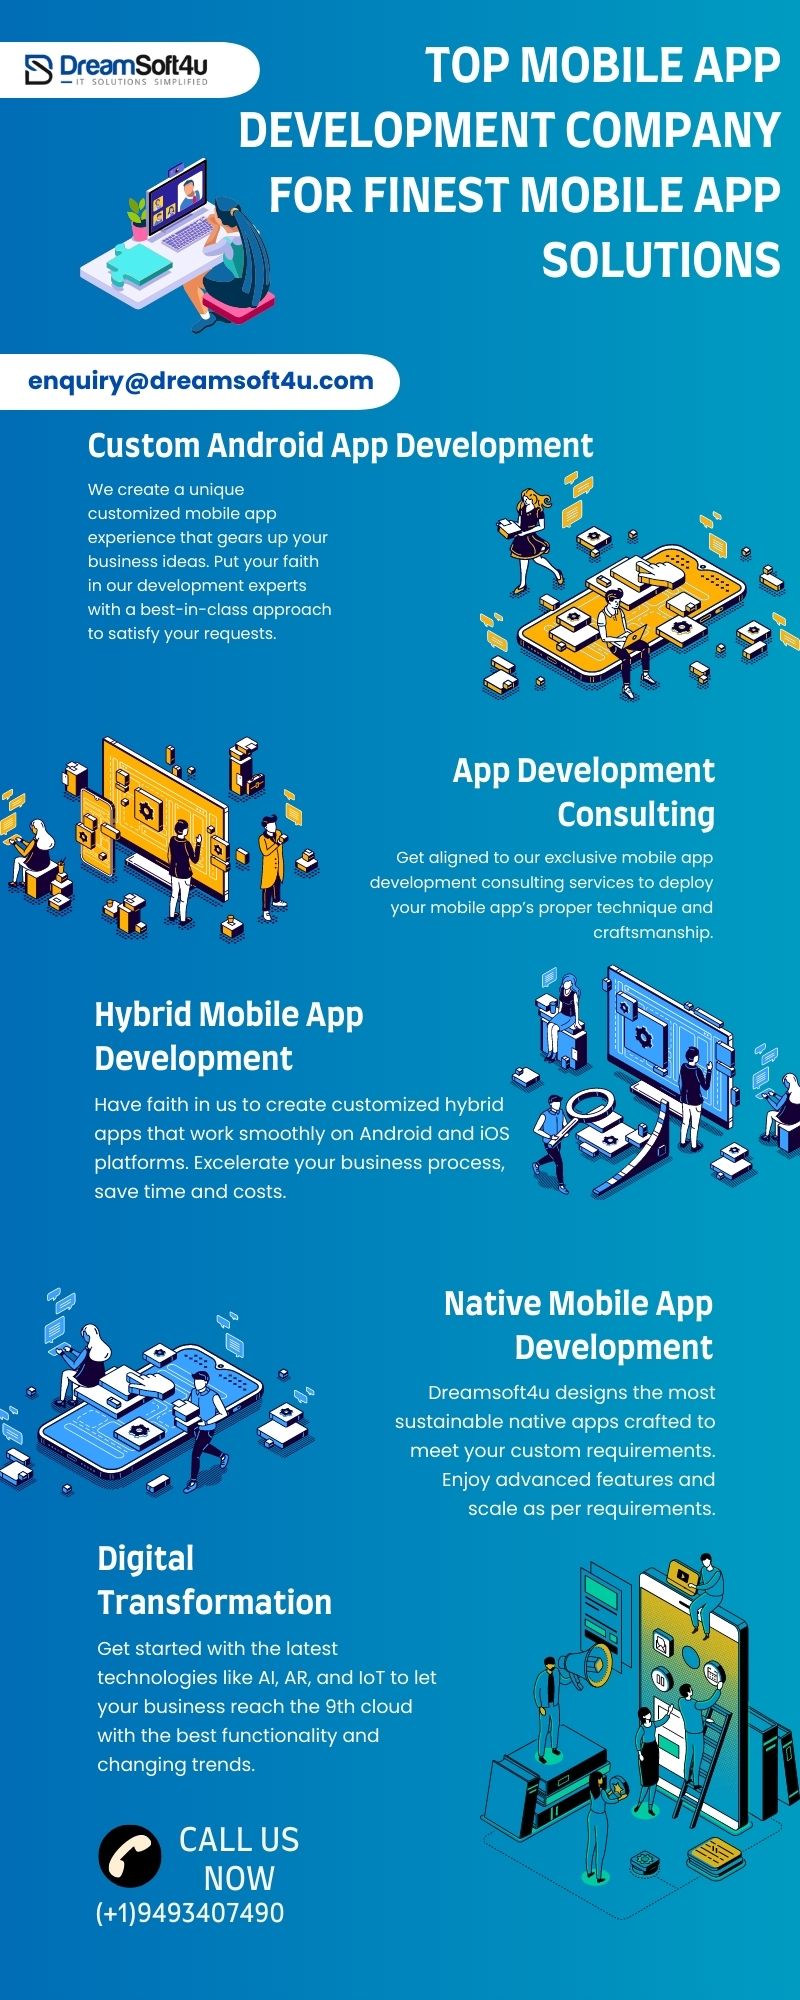 Top Mobile App Development Company For Finest Mobile App Solutions